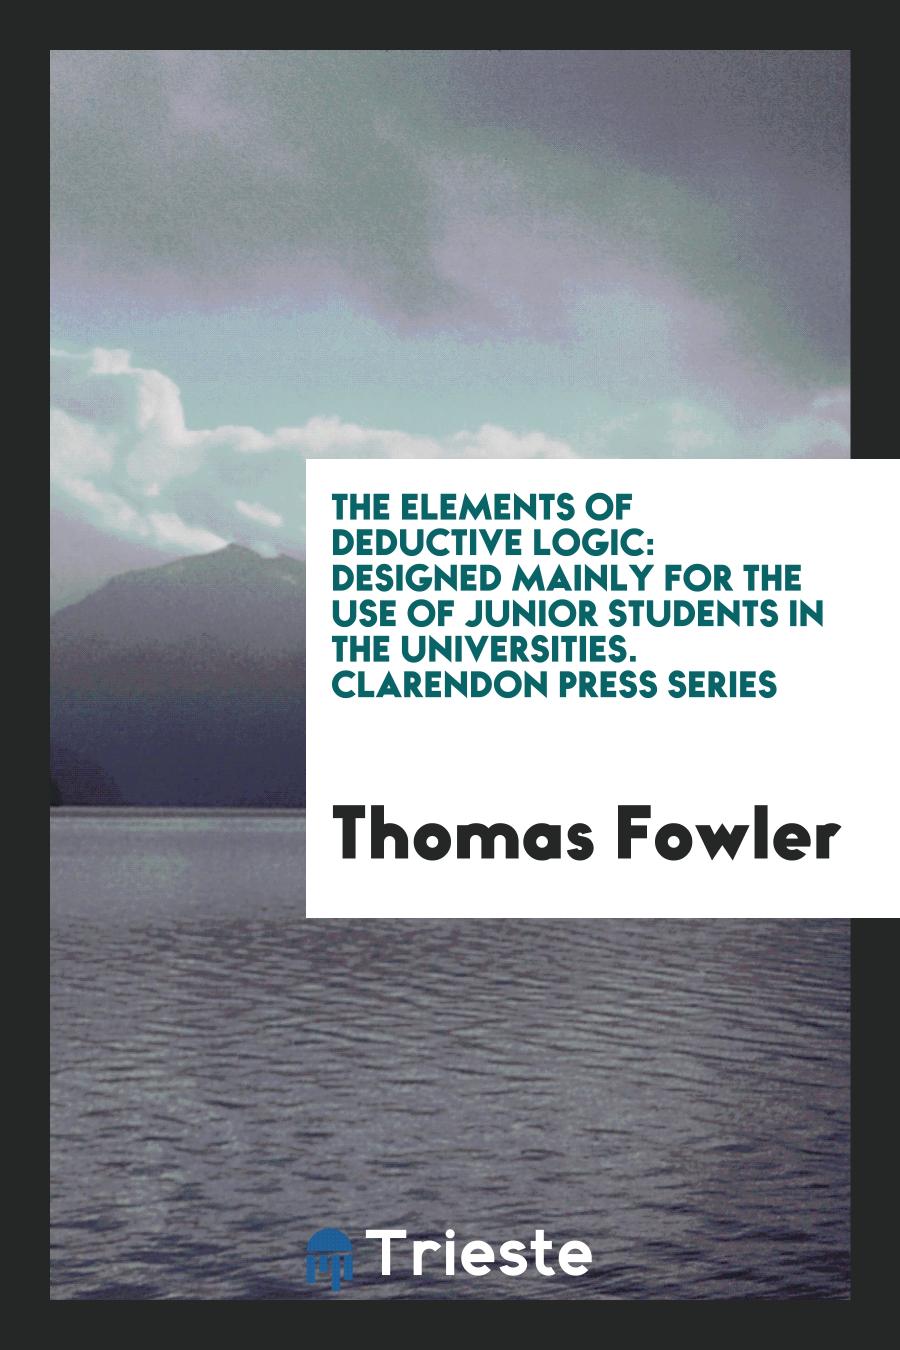 The Elements of Deductive Logic: Designed Mainly for the Use of Junior Students in the Universities. Clarendon Press Series